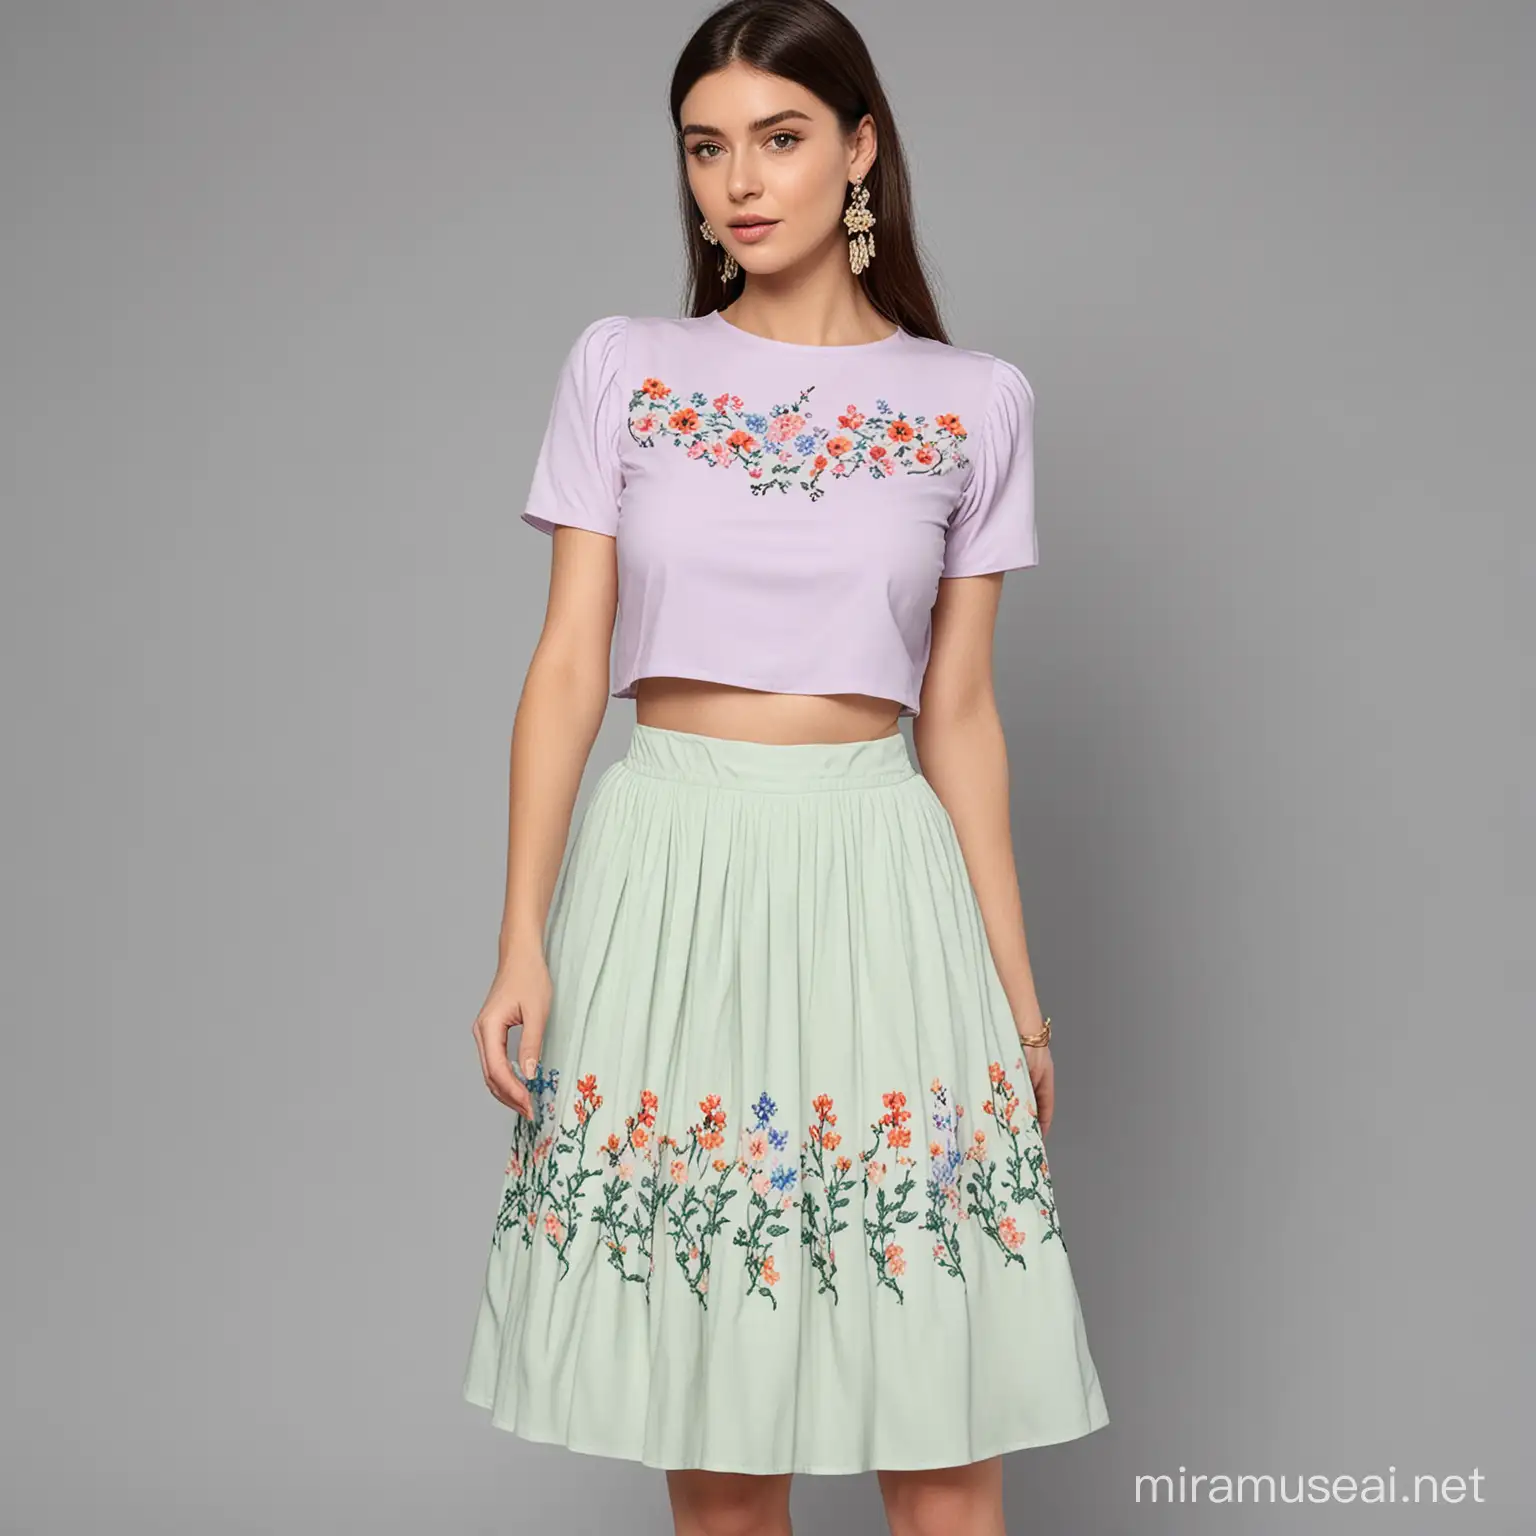 pastel colour skirt and top for women with flower embroidery